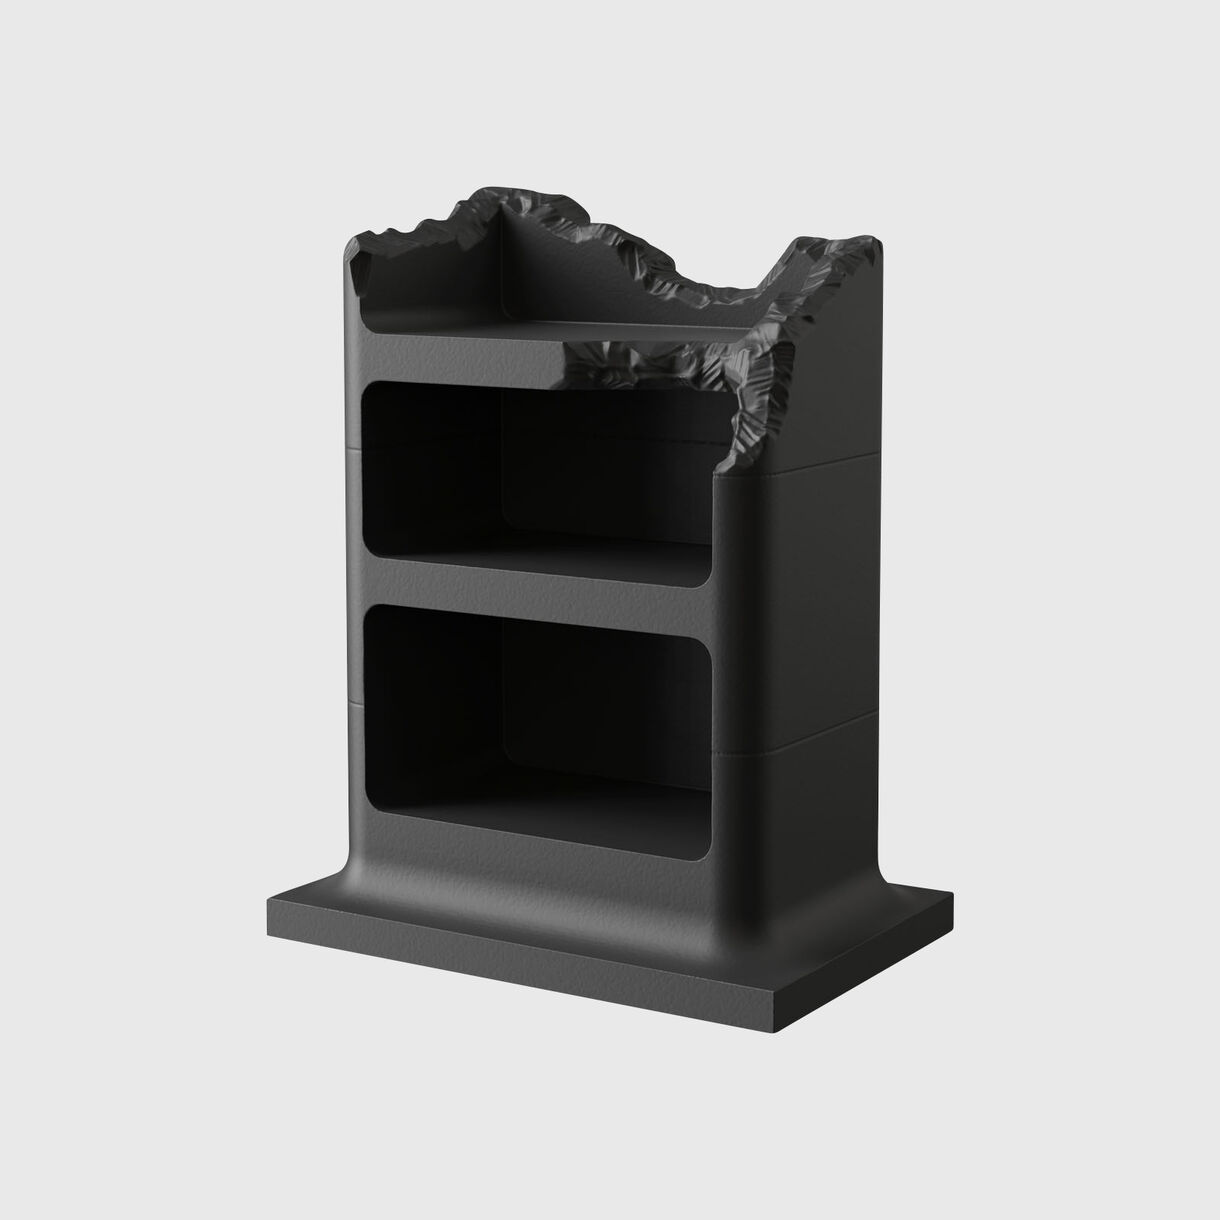 The Sculpted Series Bar Cabinet, Limited Edition, Black